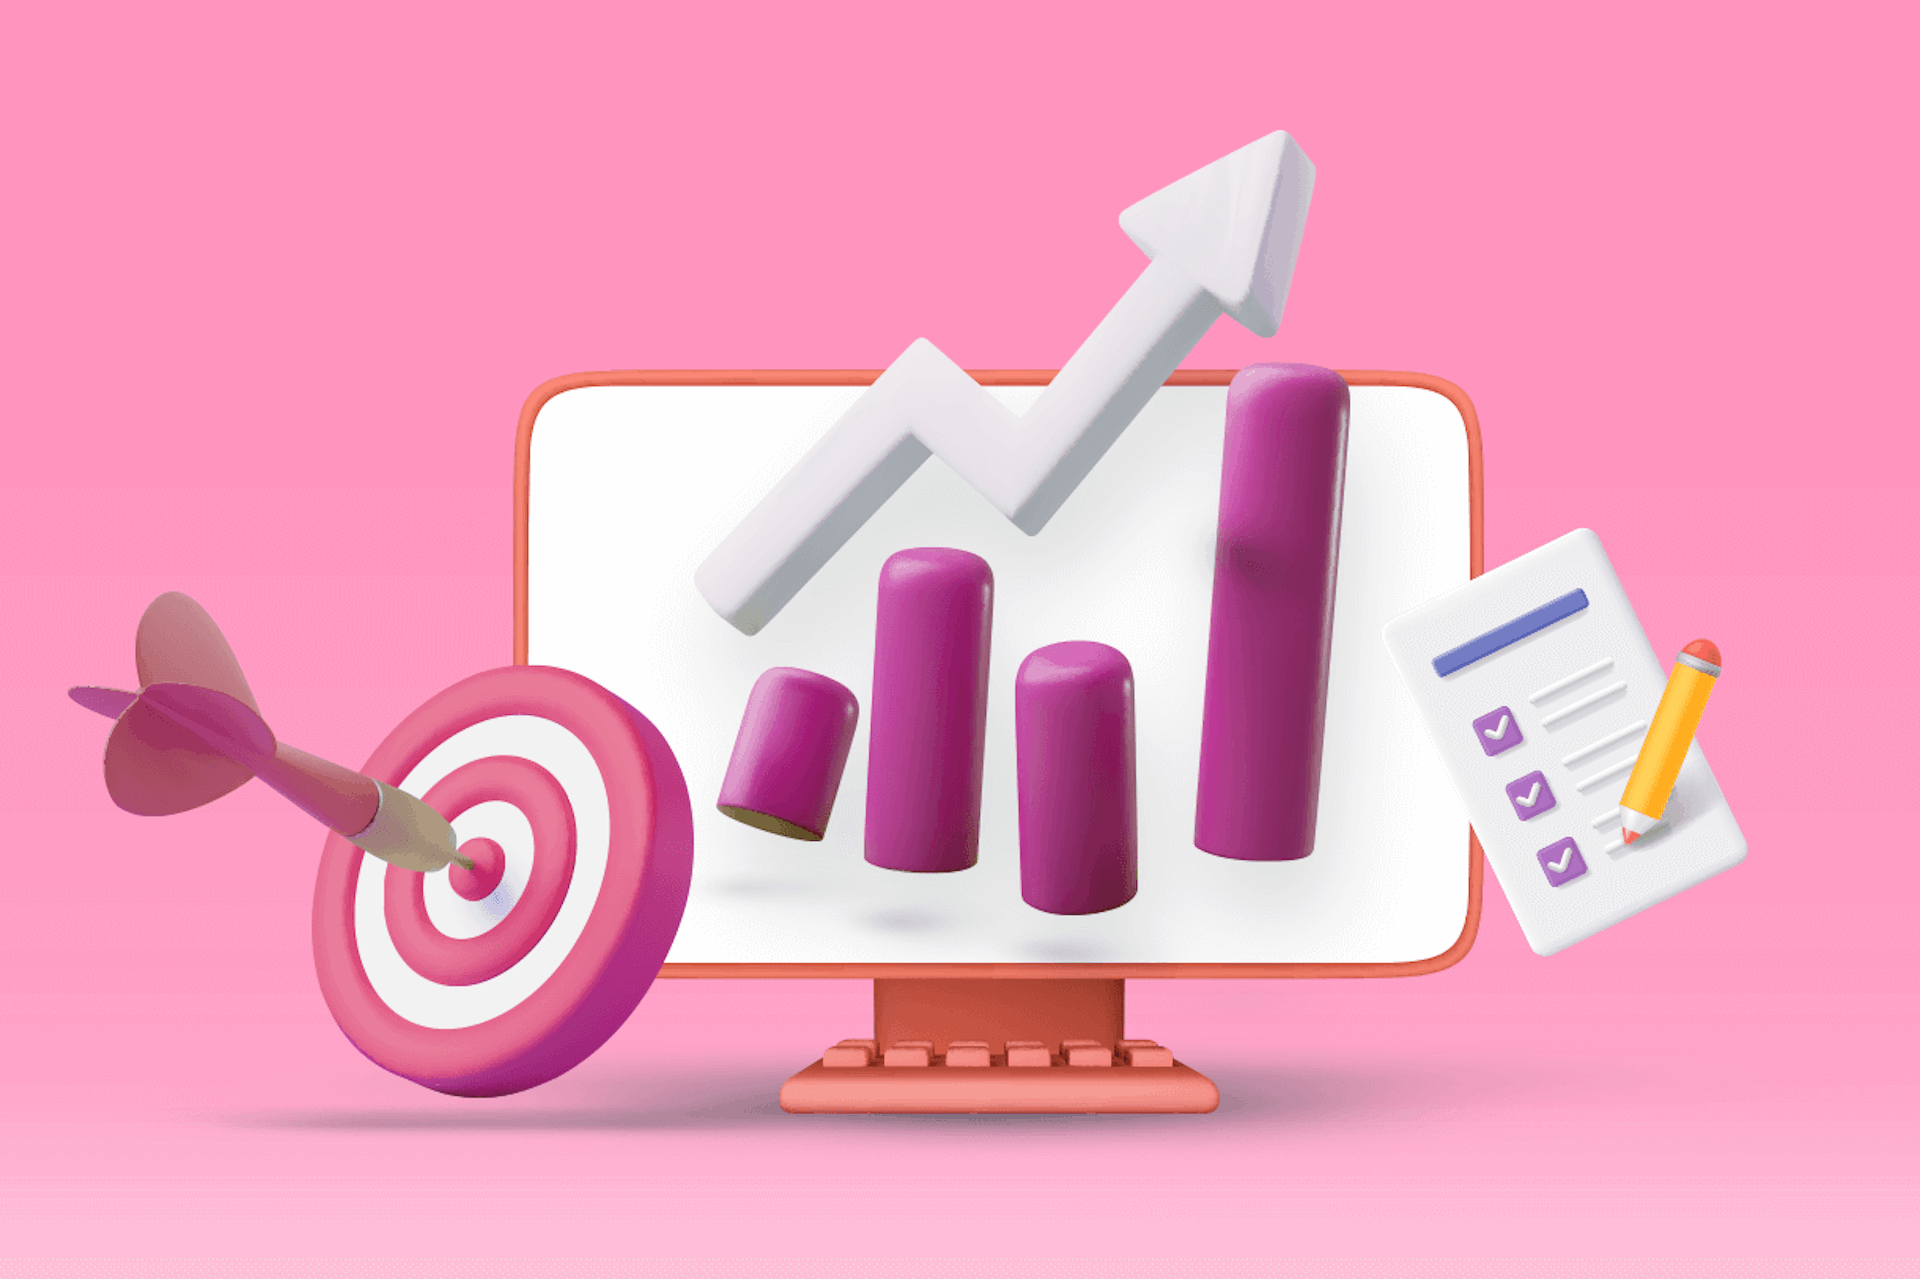 Illustration of a desktop computer with floating icons in front like a dart in a bullseye, an arrow going up and to the right over a bar graph, and a checklist. Brand Strategy blog post.